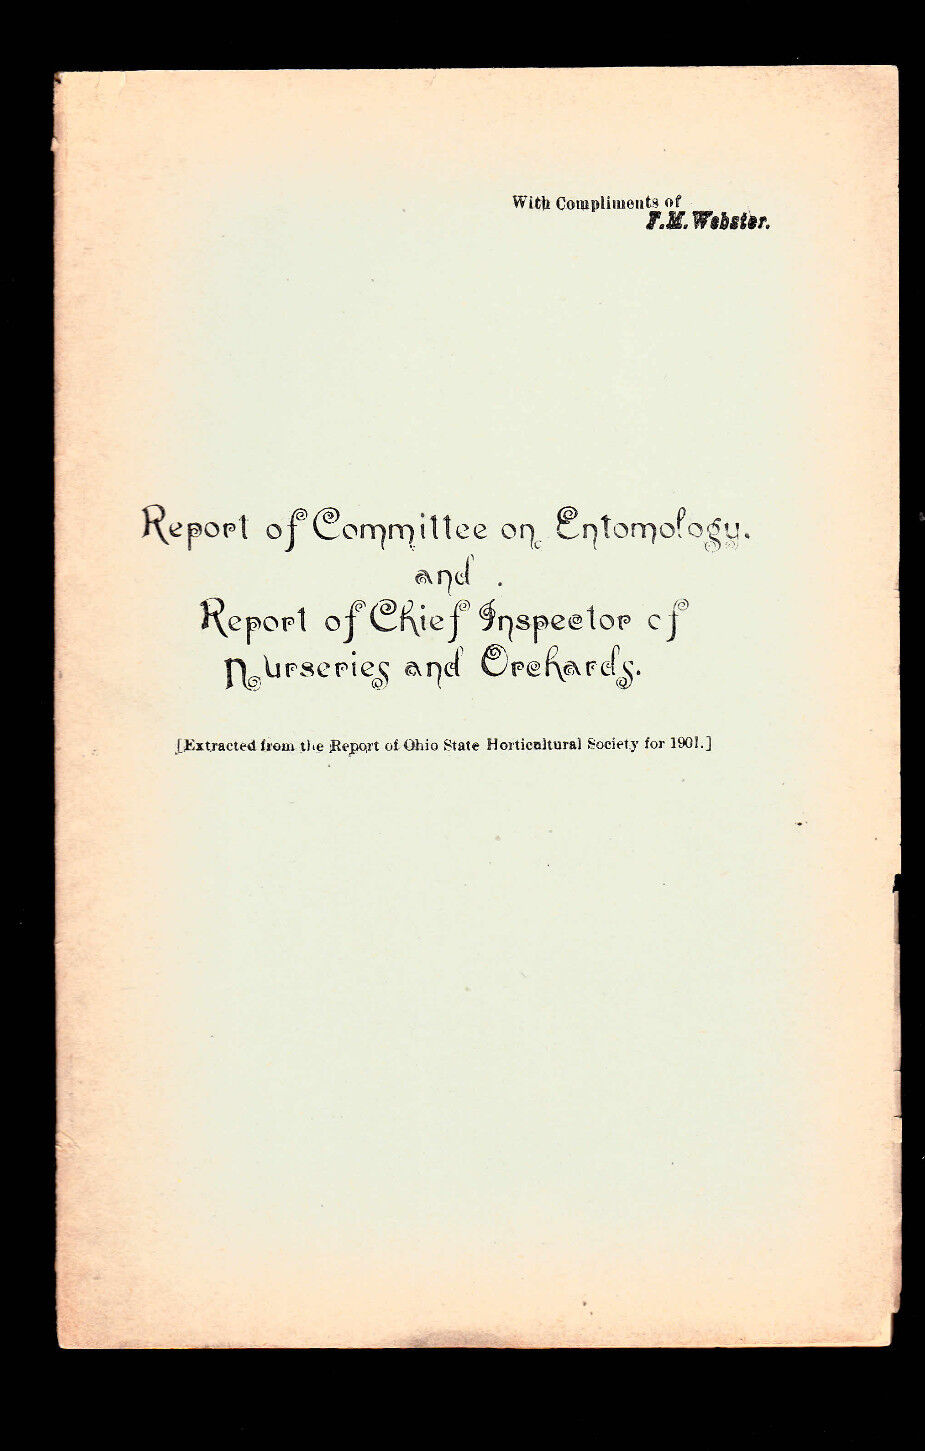 Report of Committee on Entomology & Inspector of Nurseries & Orchards 1901